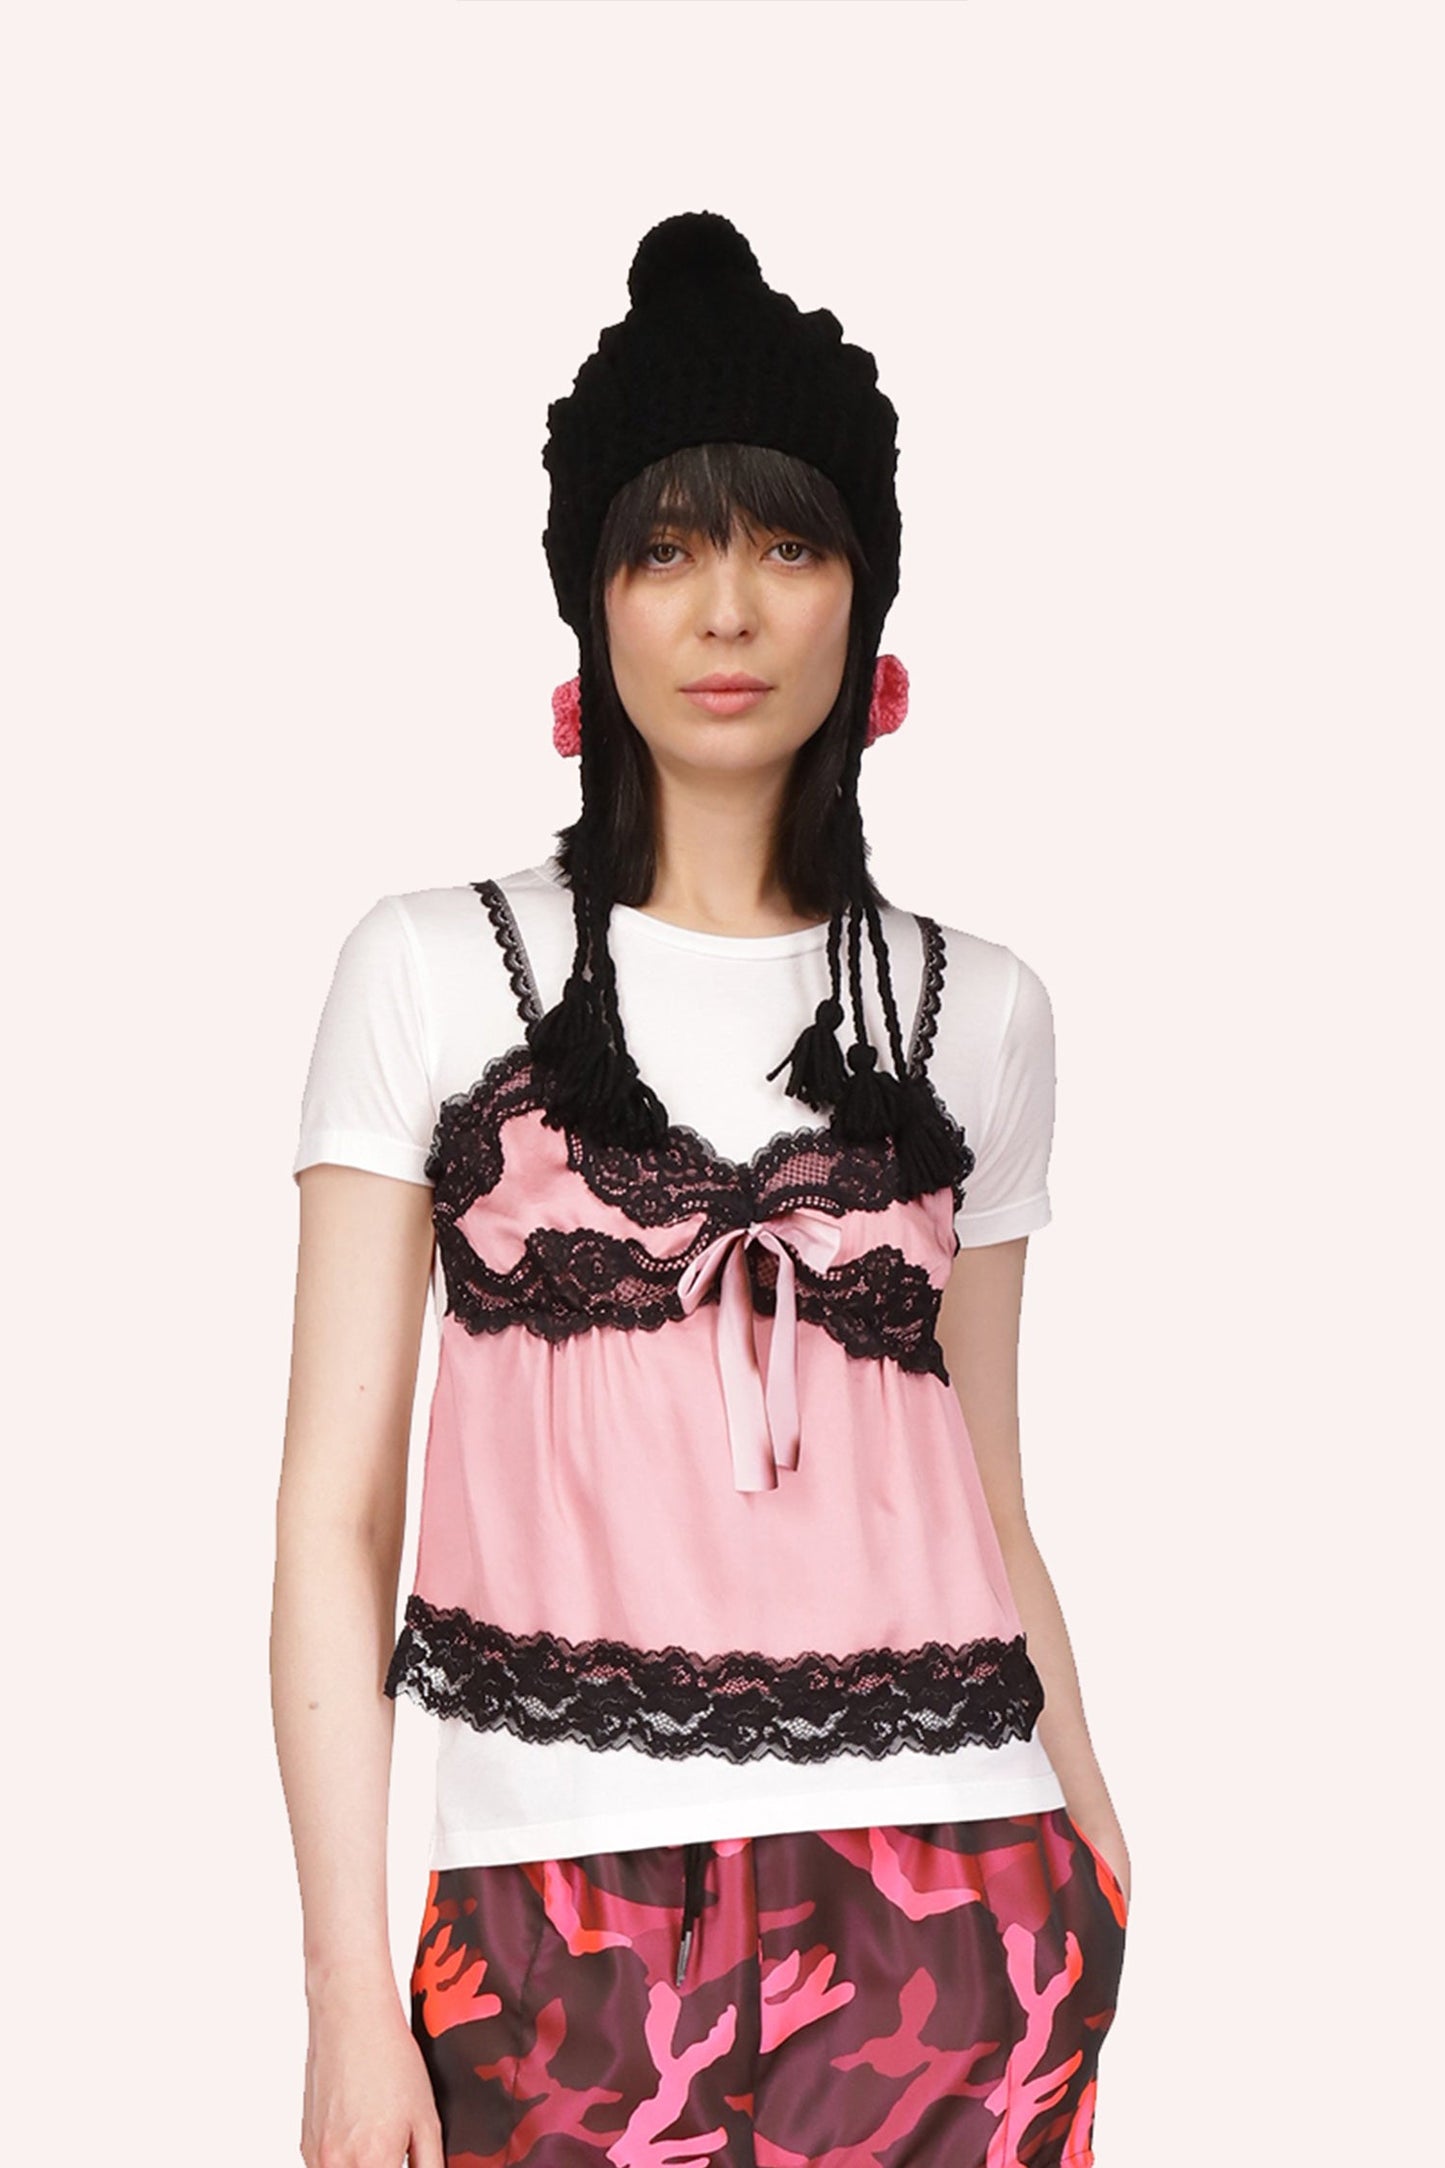 Sleeveless tee, backless, rose, black hems lace, 2-straps, V-collar, pink ribbon middle chest